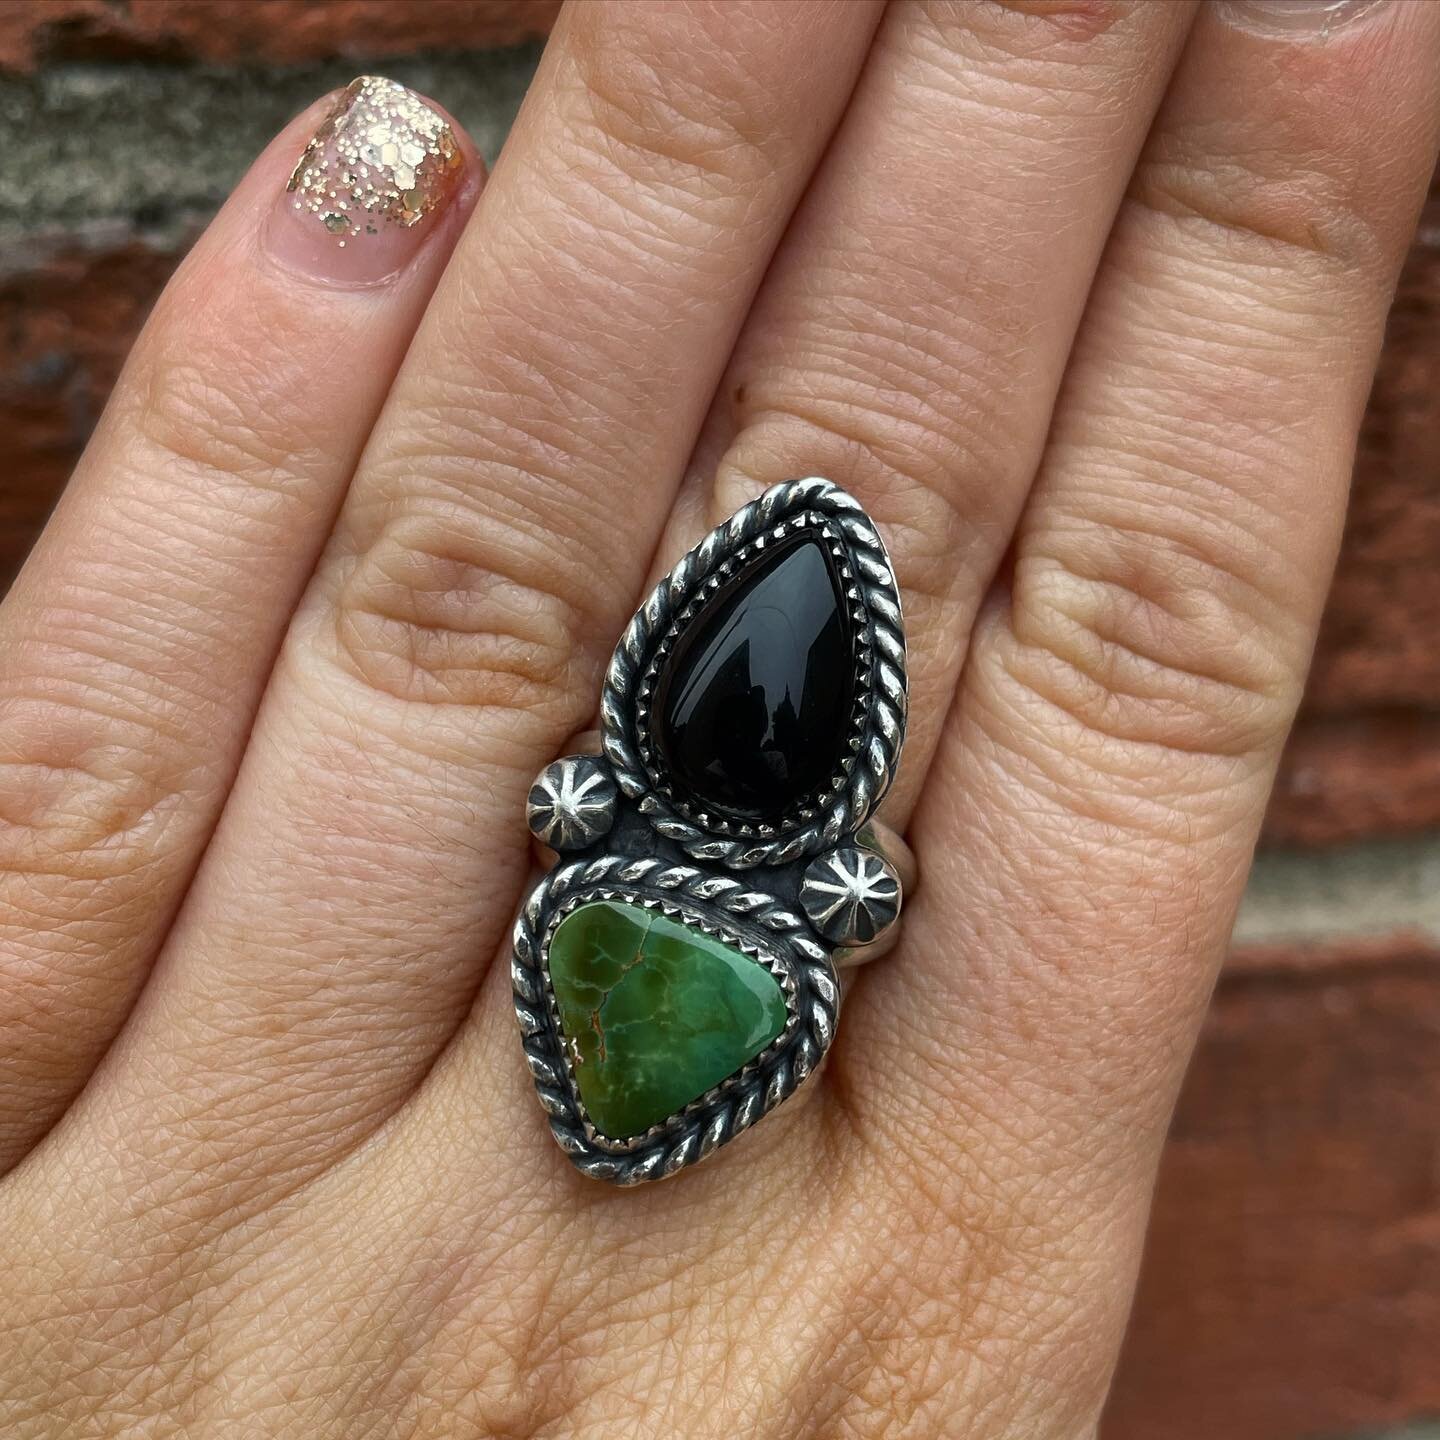 Black Onyx &amp; Royston Turquoise concho ring 🌵🤠

UK N (US 6.75) ⛓

AVAILABLE ⚡️

⛓www.wildmoonsilver.com⛓